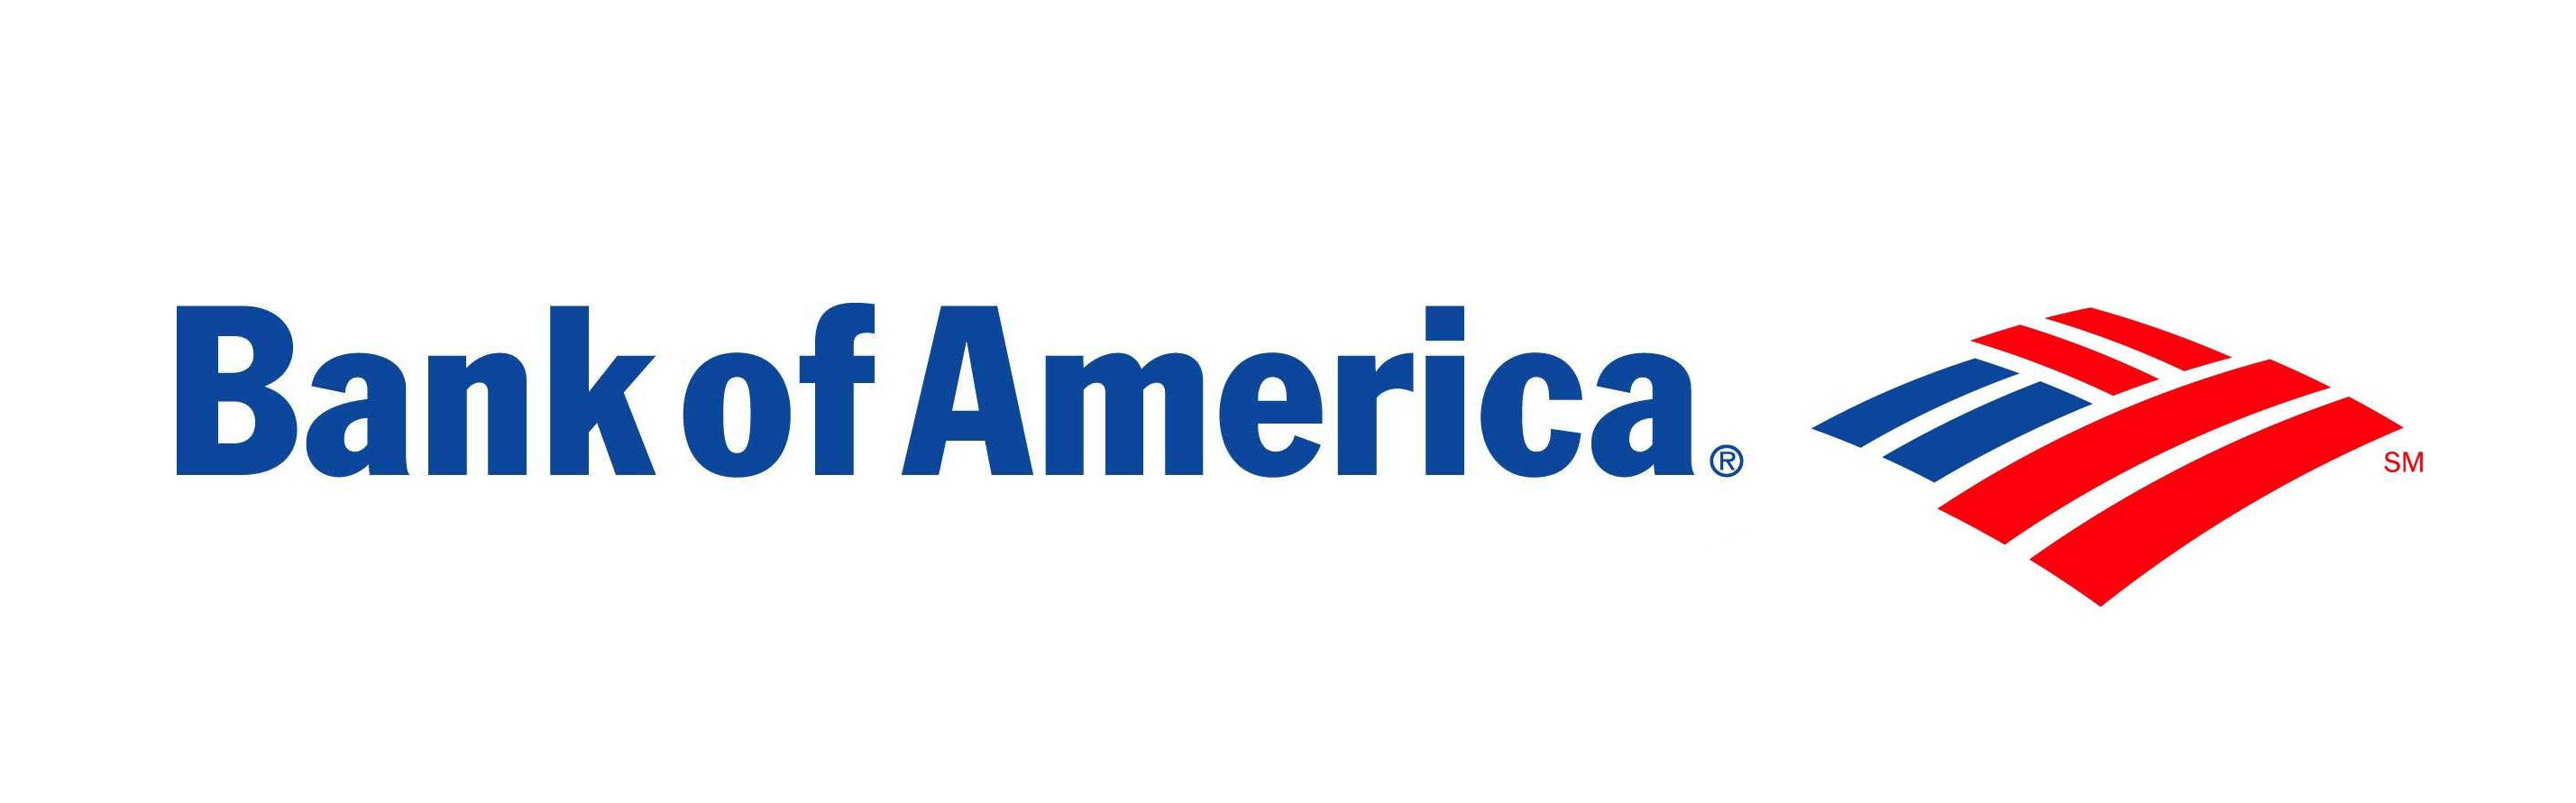 Clean Bank Of America 1998 Logo Picture